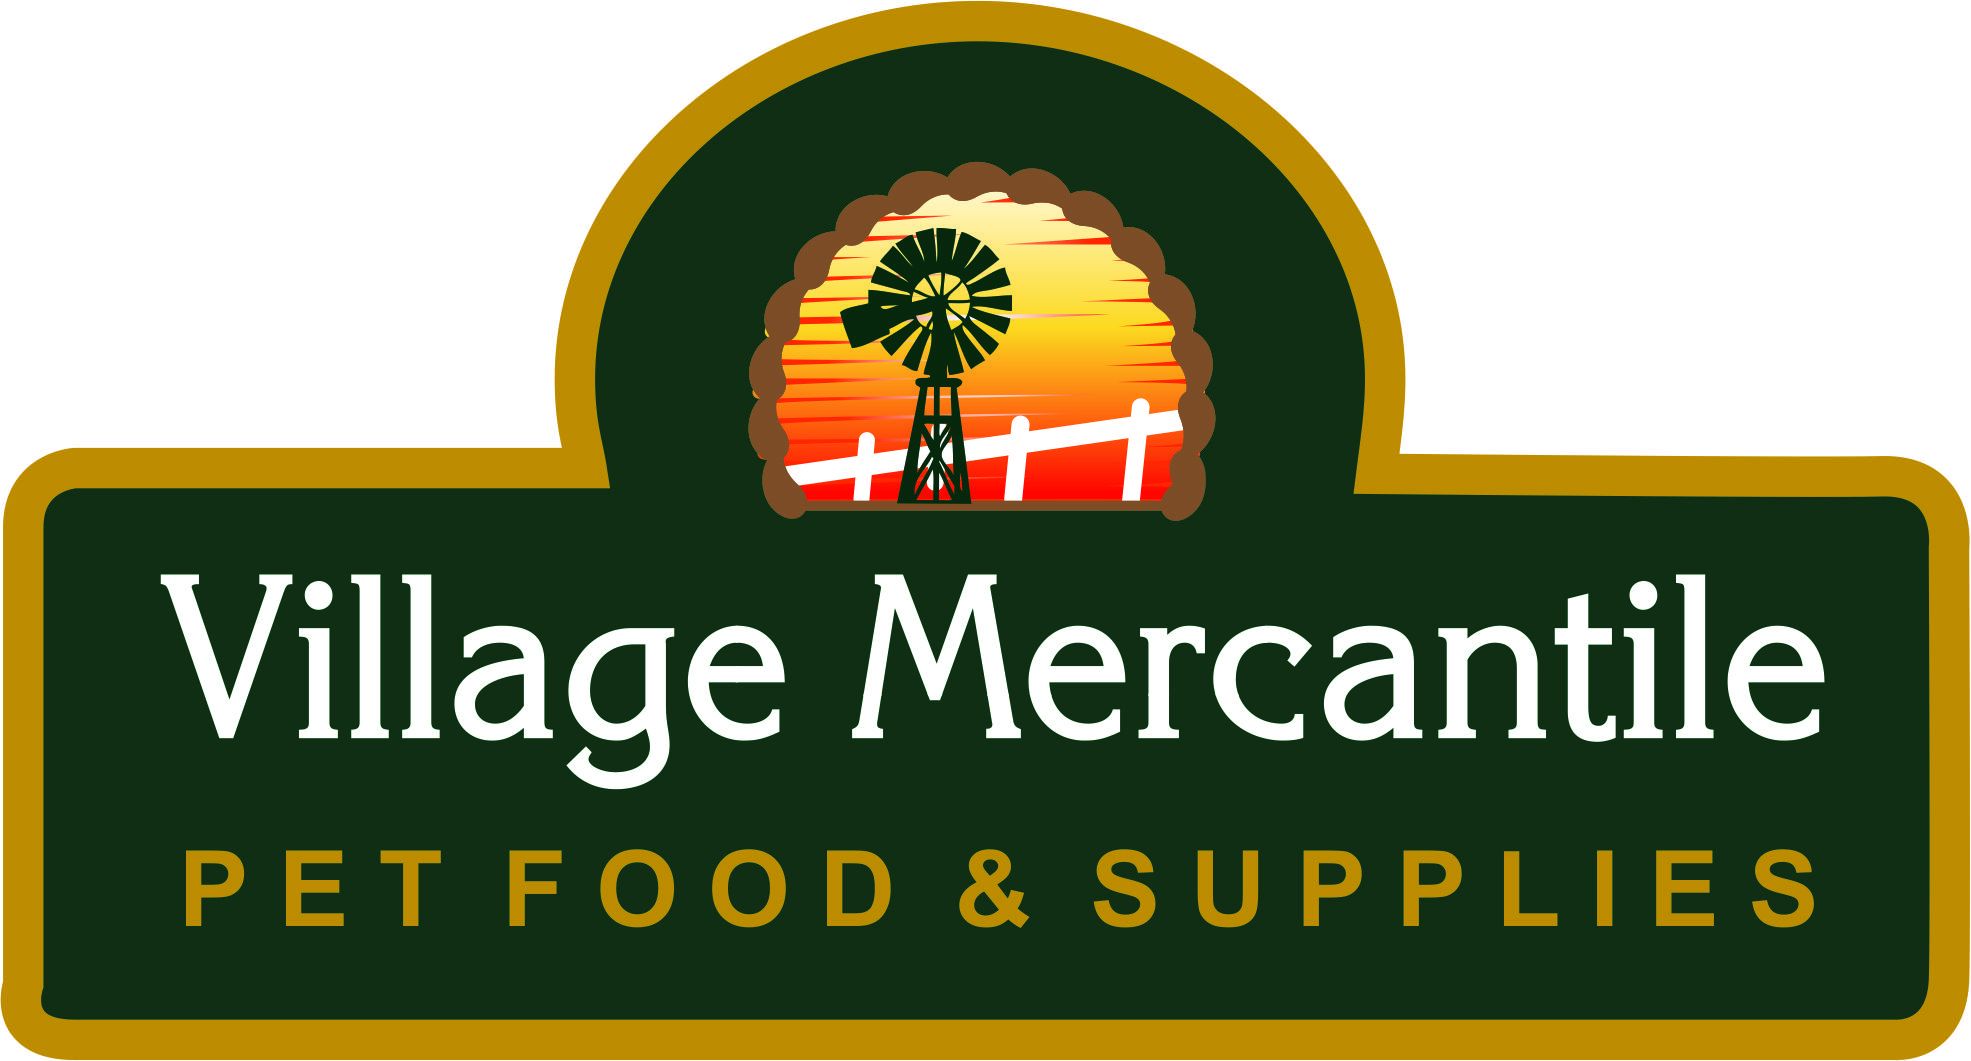 Business logo of Village Mercantile Home and Farm Store